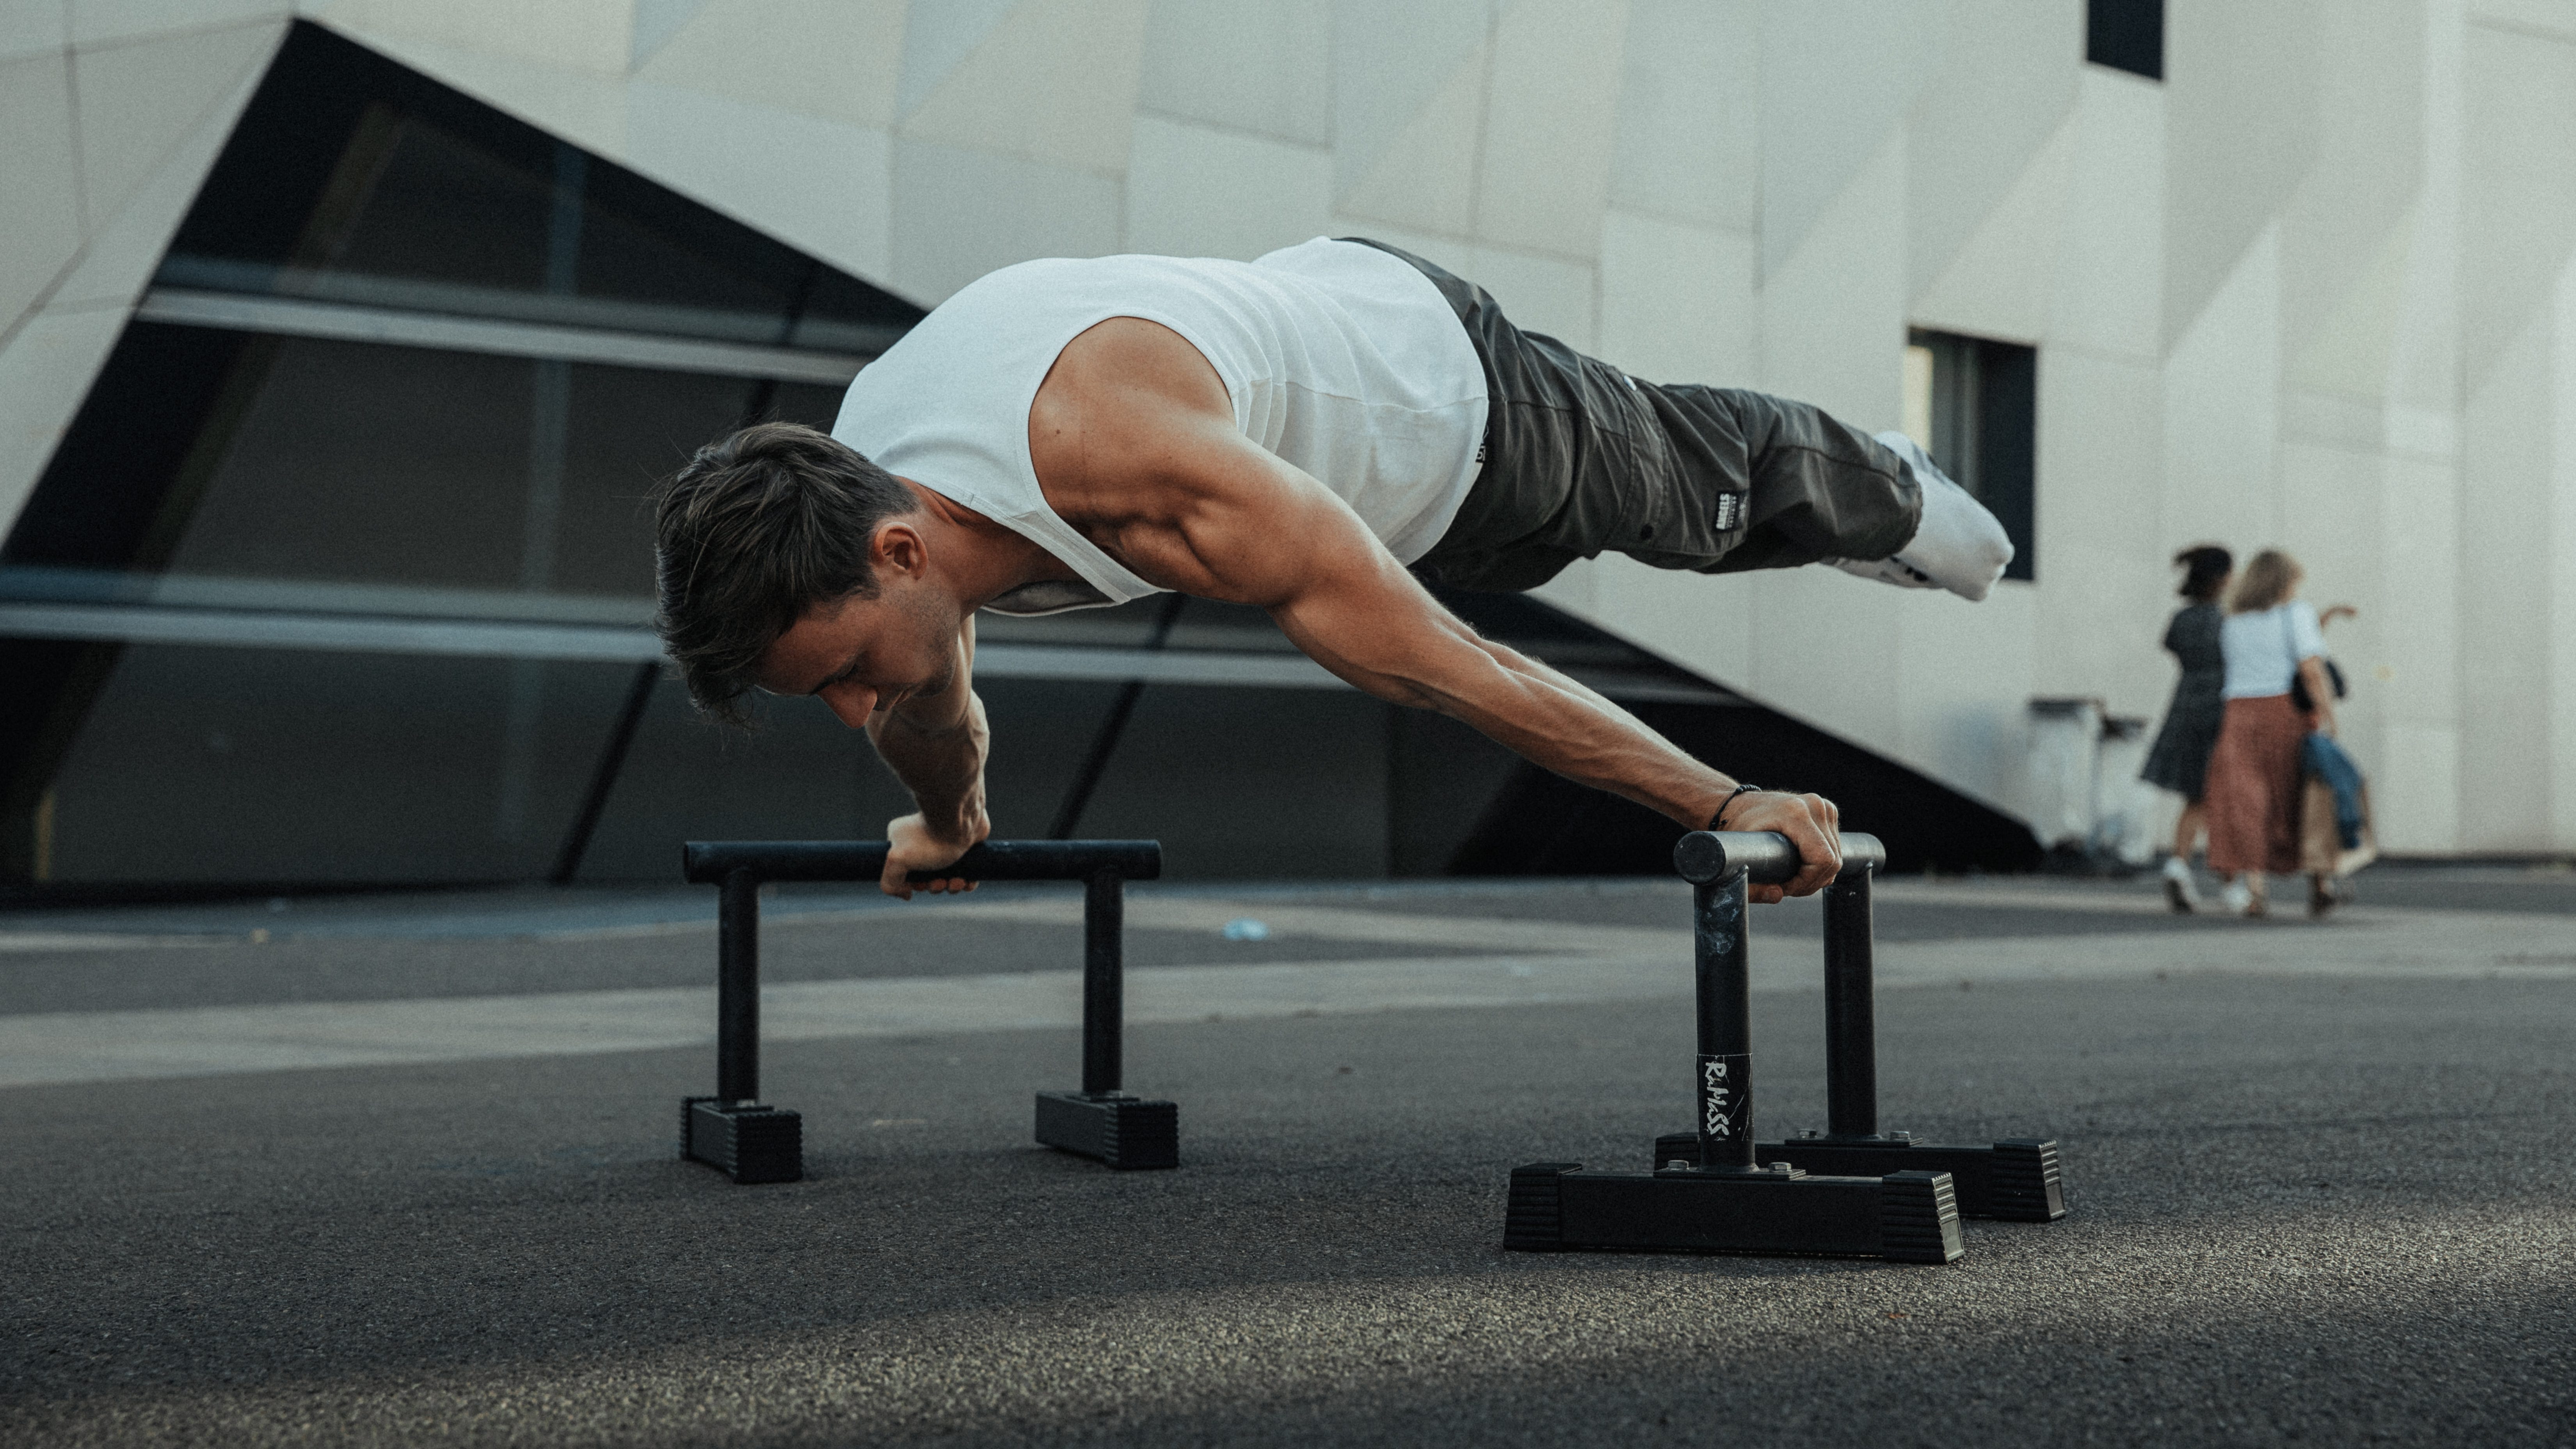 3 Reasons Why Calisthenics is My Main Workout Routine